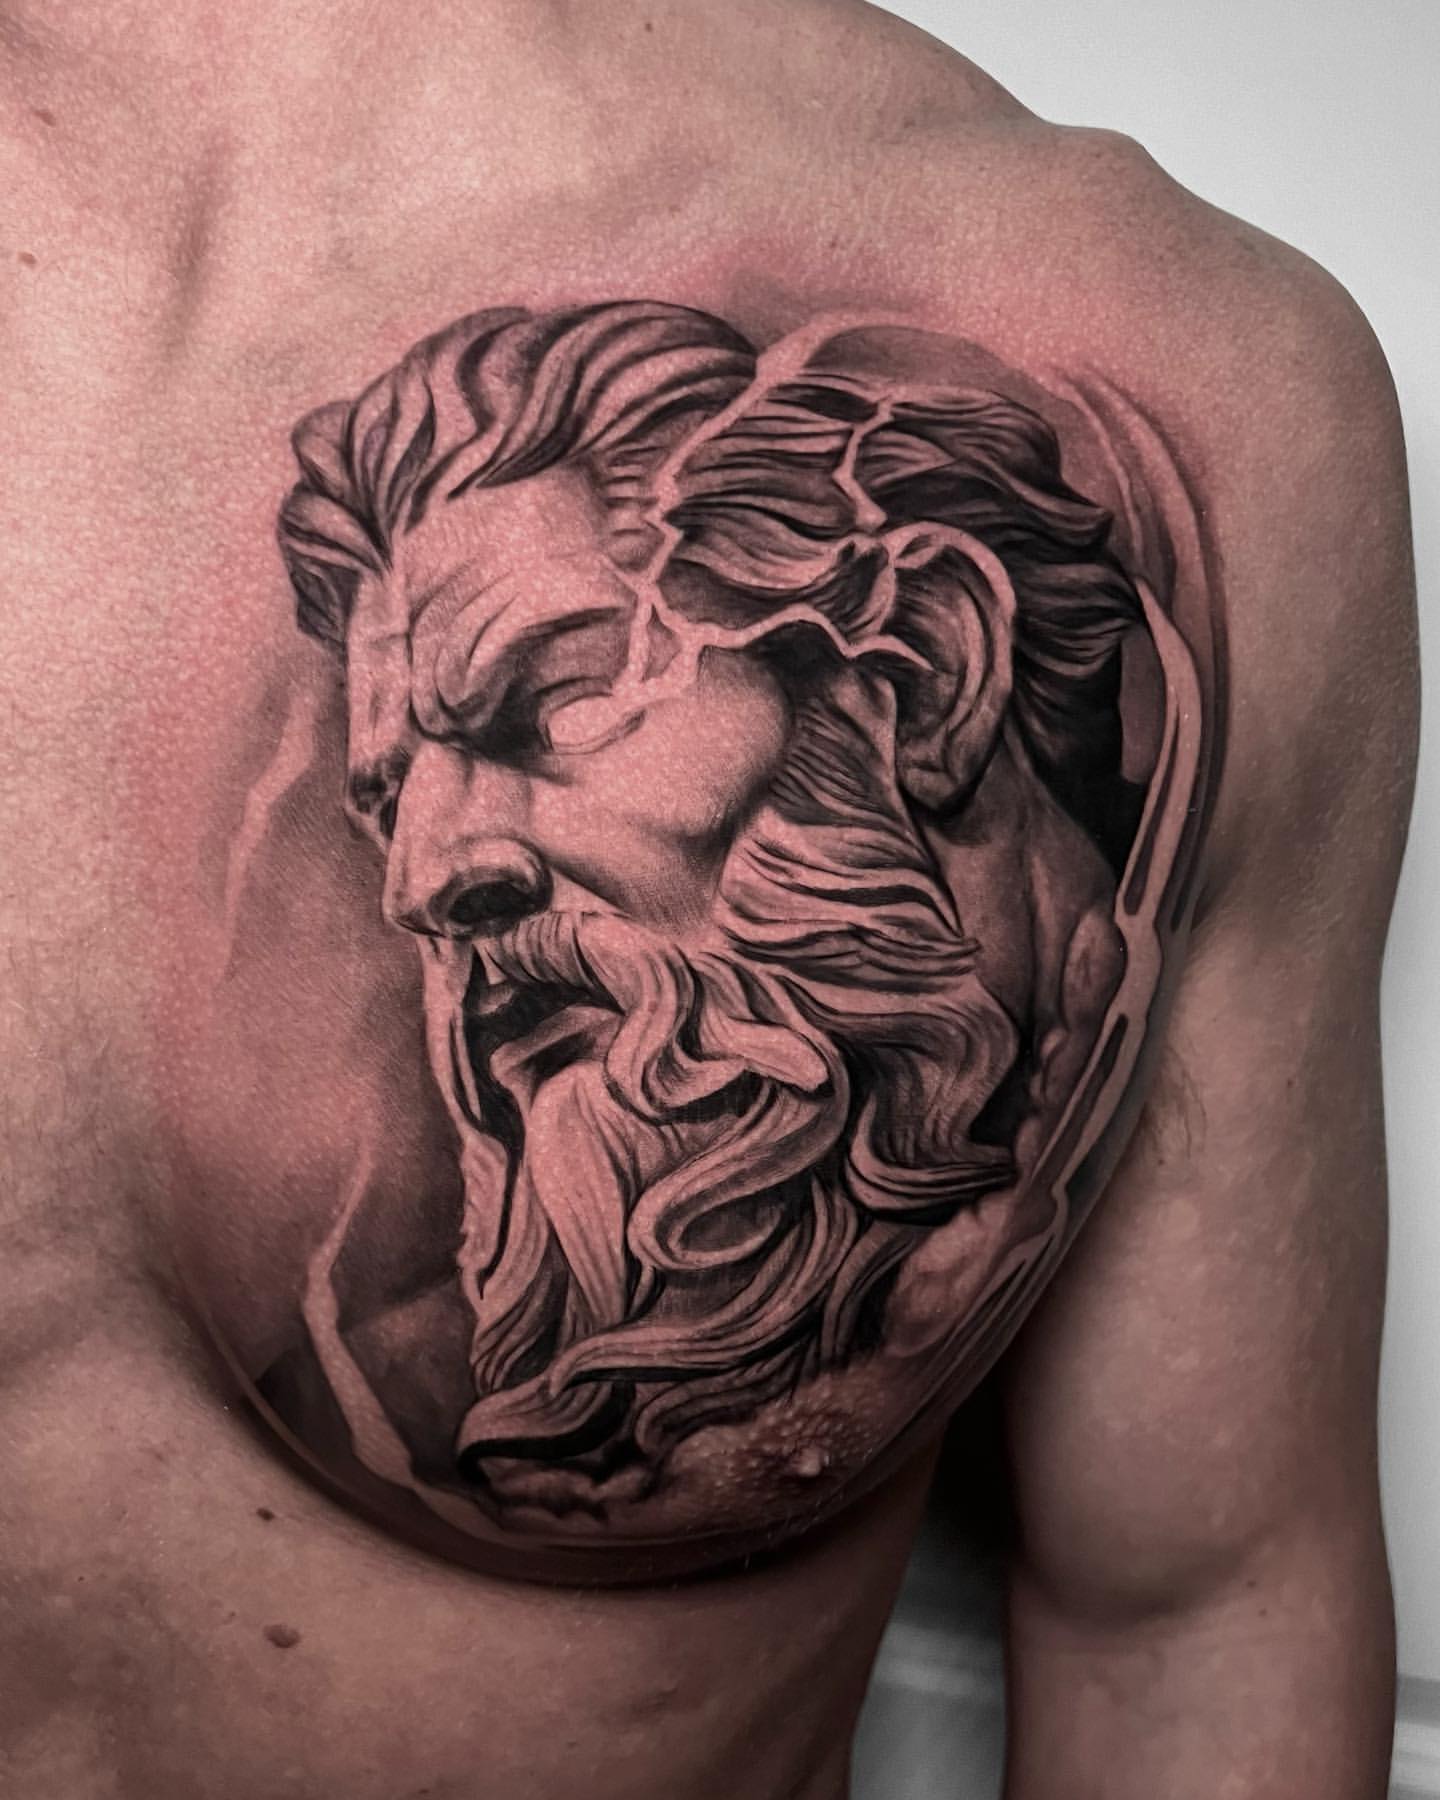 Zeus Tattoo - The Most Amazing Zeus Tattoos You'll Ever See!